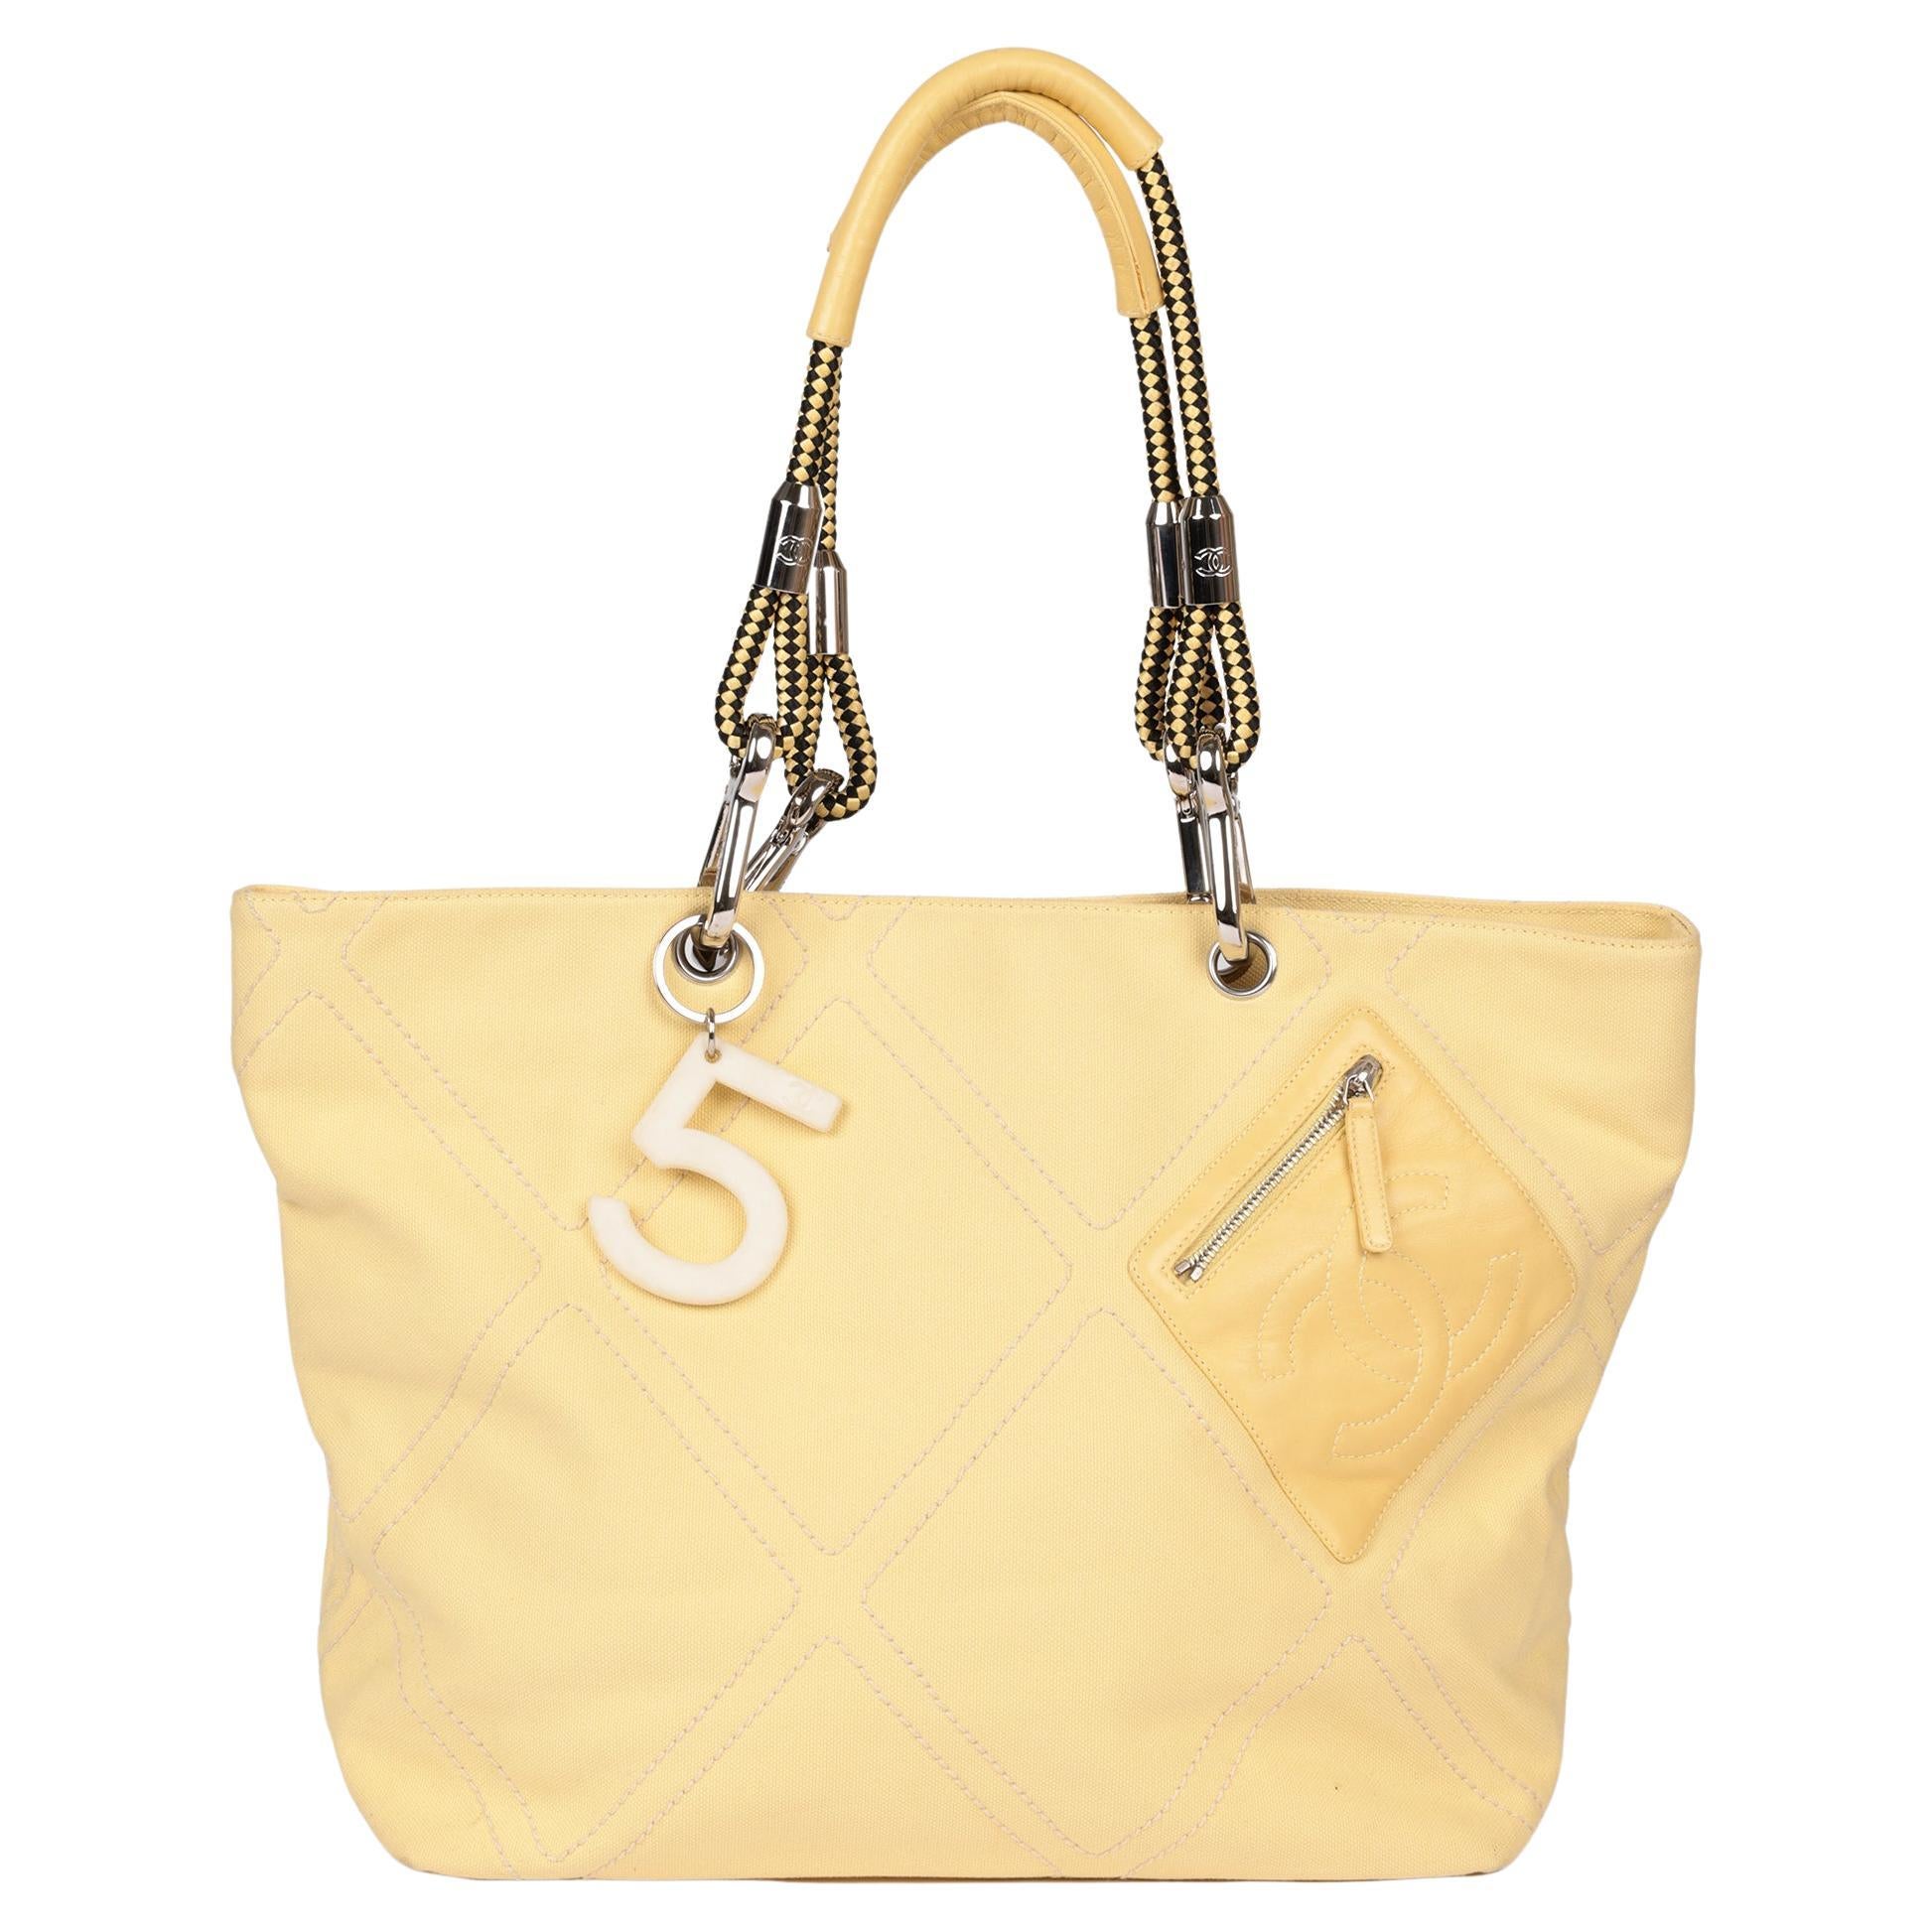 Chanel Yellow Canvas Vintage No.5 Timeless Tote